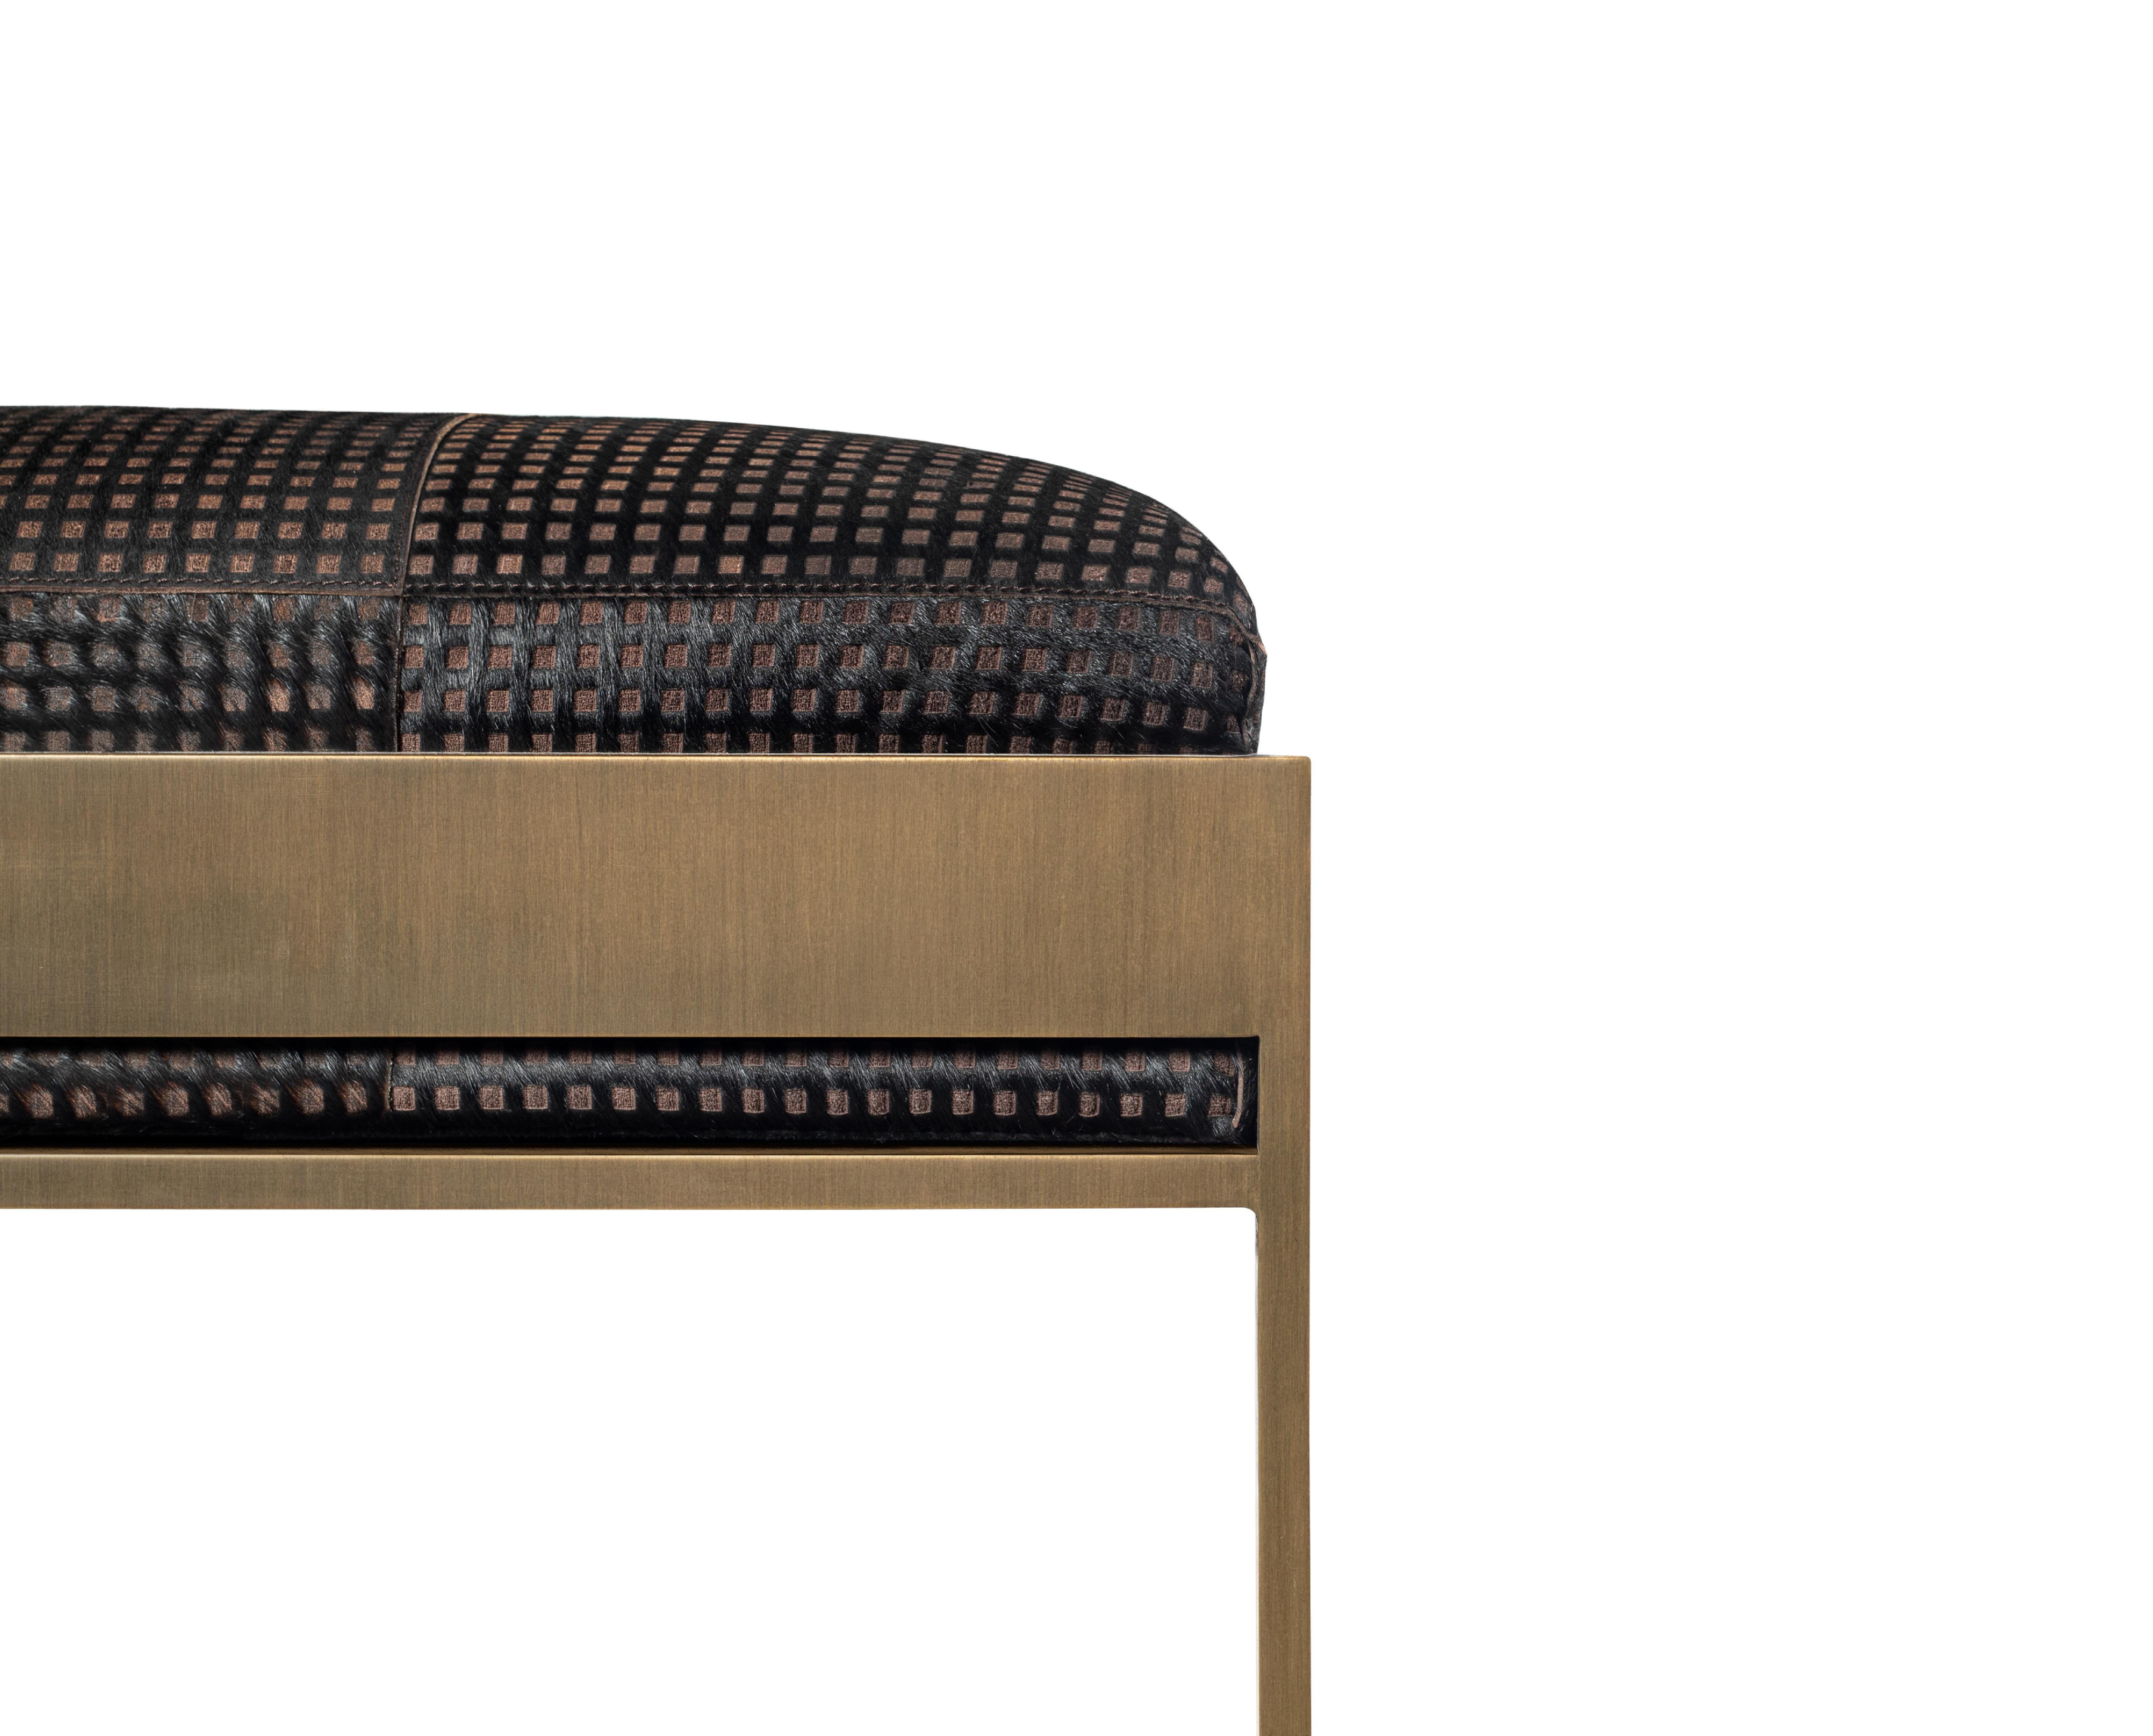 Metal Etched Hair-On Upholstery Jacob Bench by Madheke For Sale